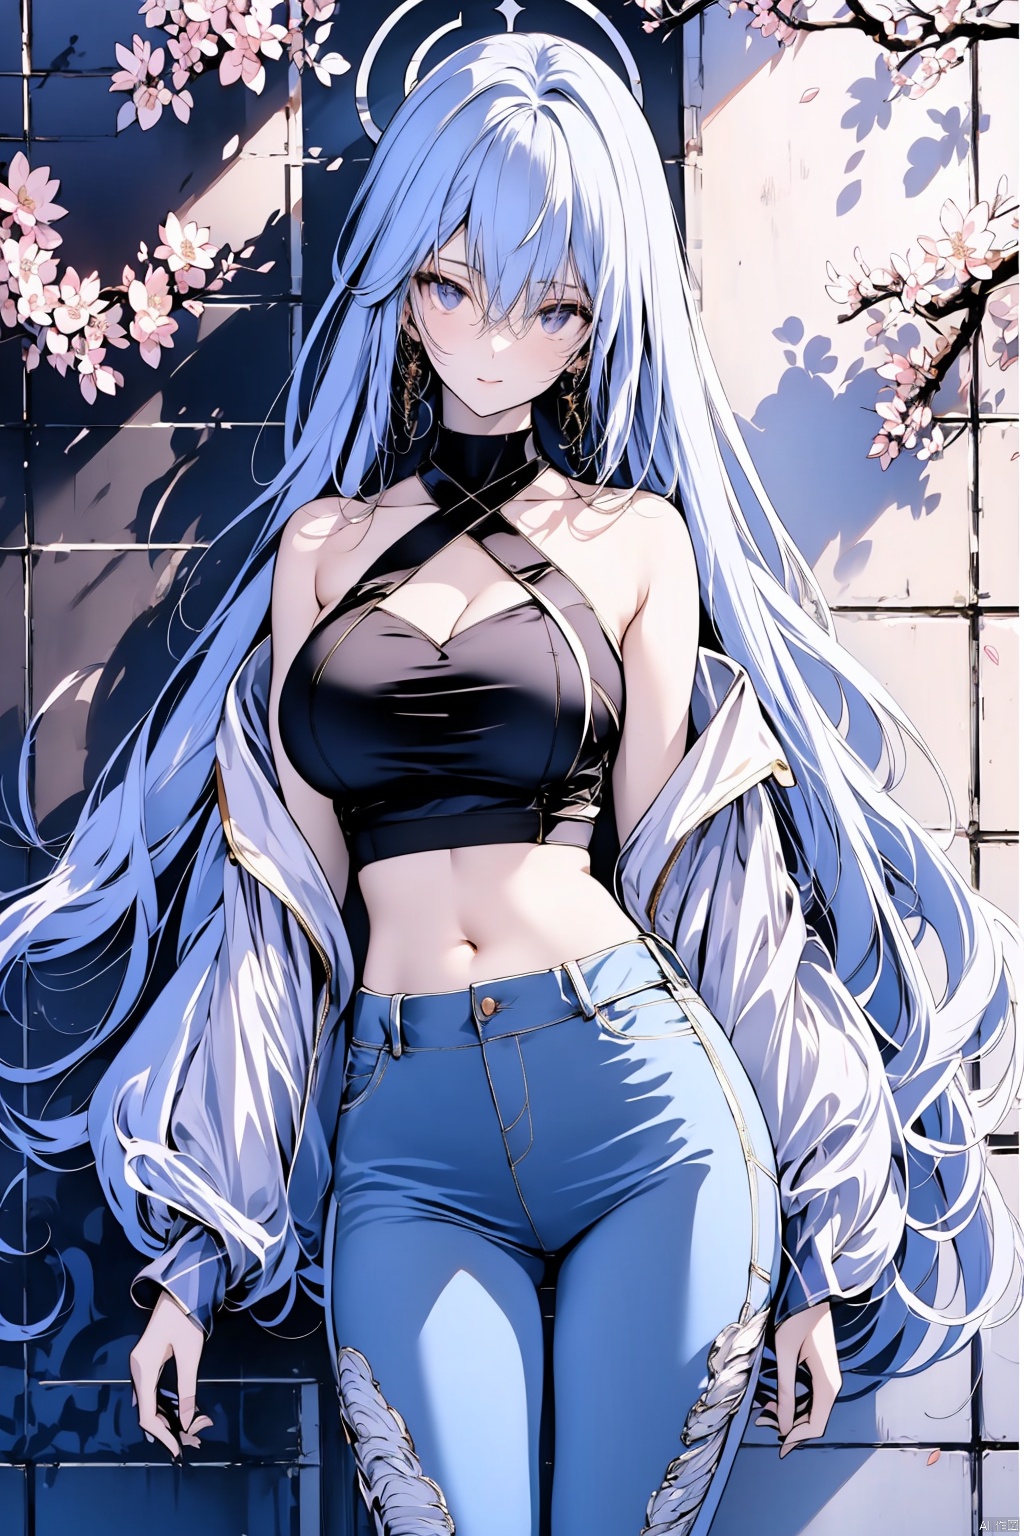 beautiful_long_green_hair, beautiful_purple_eyes, 1_beautiful_girl, cute_face, perfect_quality, perfect_anatomy, masterpiece, one-shoulder top, Skinny jeans, brown_boots, lora:more_details:0.5, cherry blossoms, beautiful